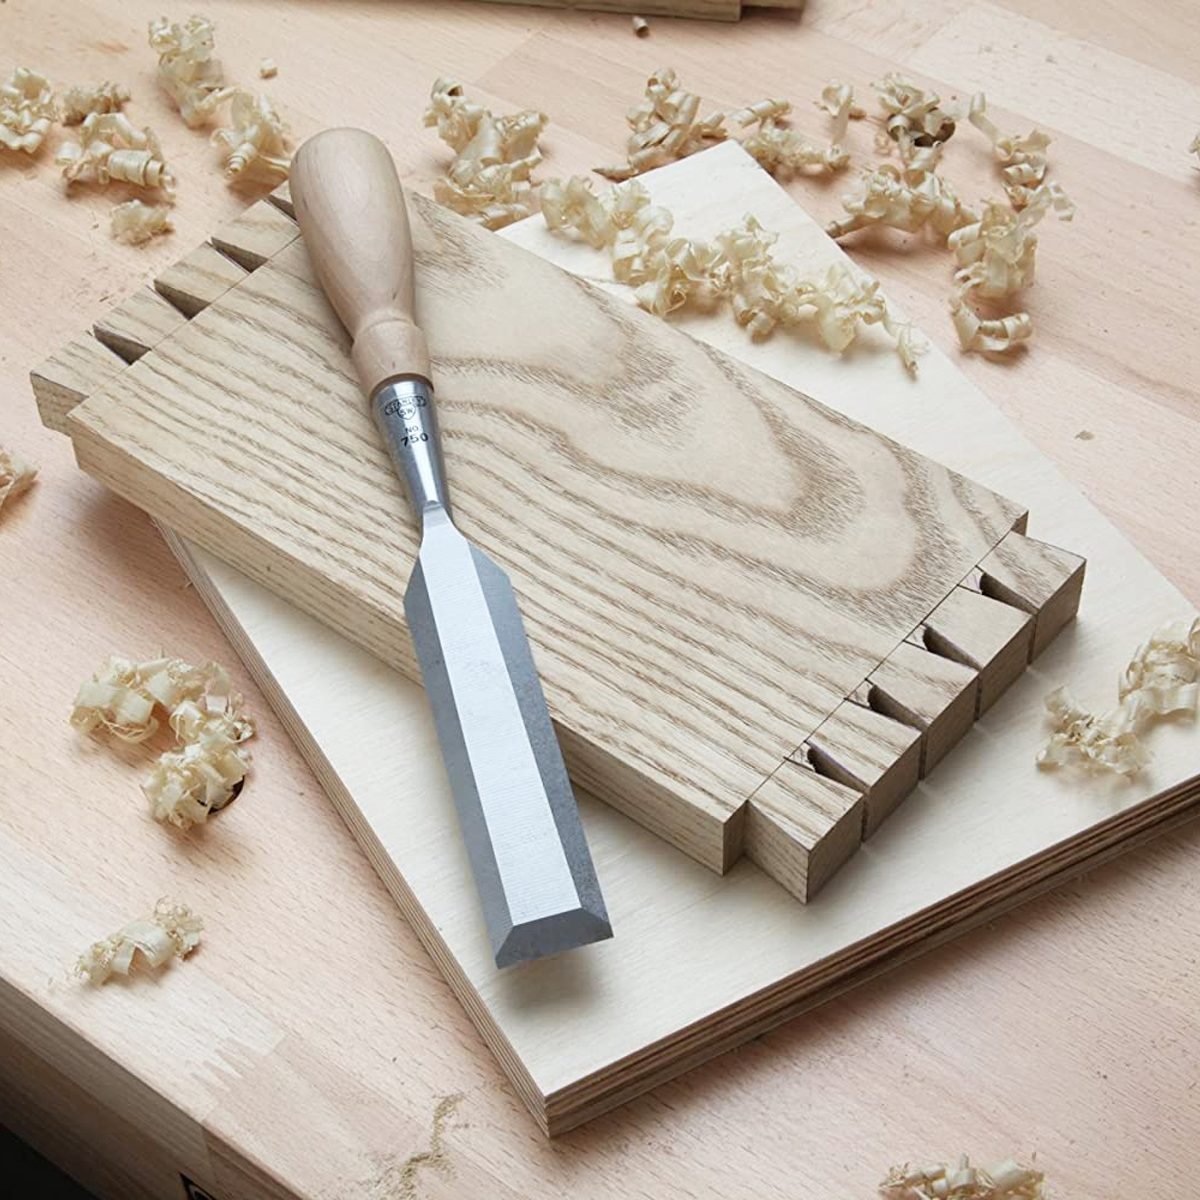 Gifts for woodworkers: 20 gift ideas for the handy friend in your life